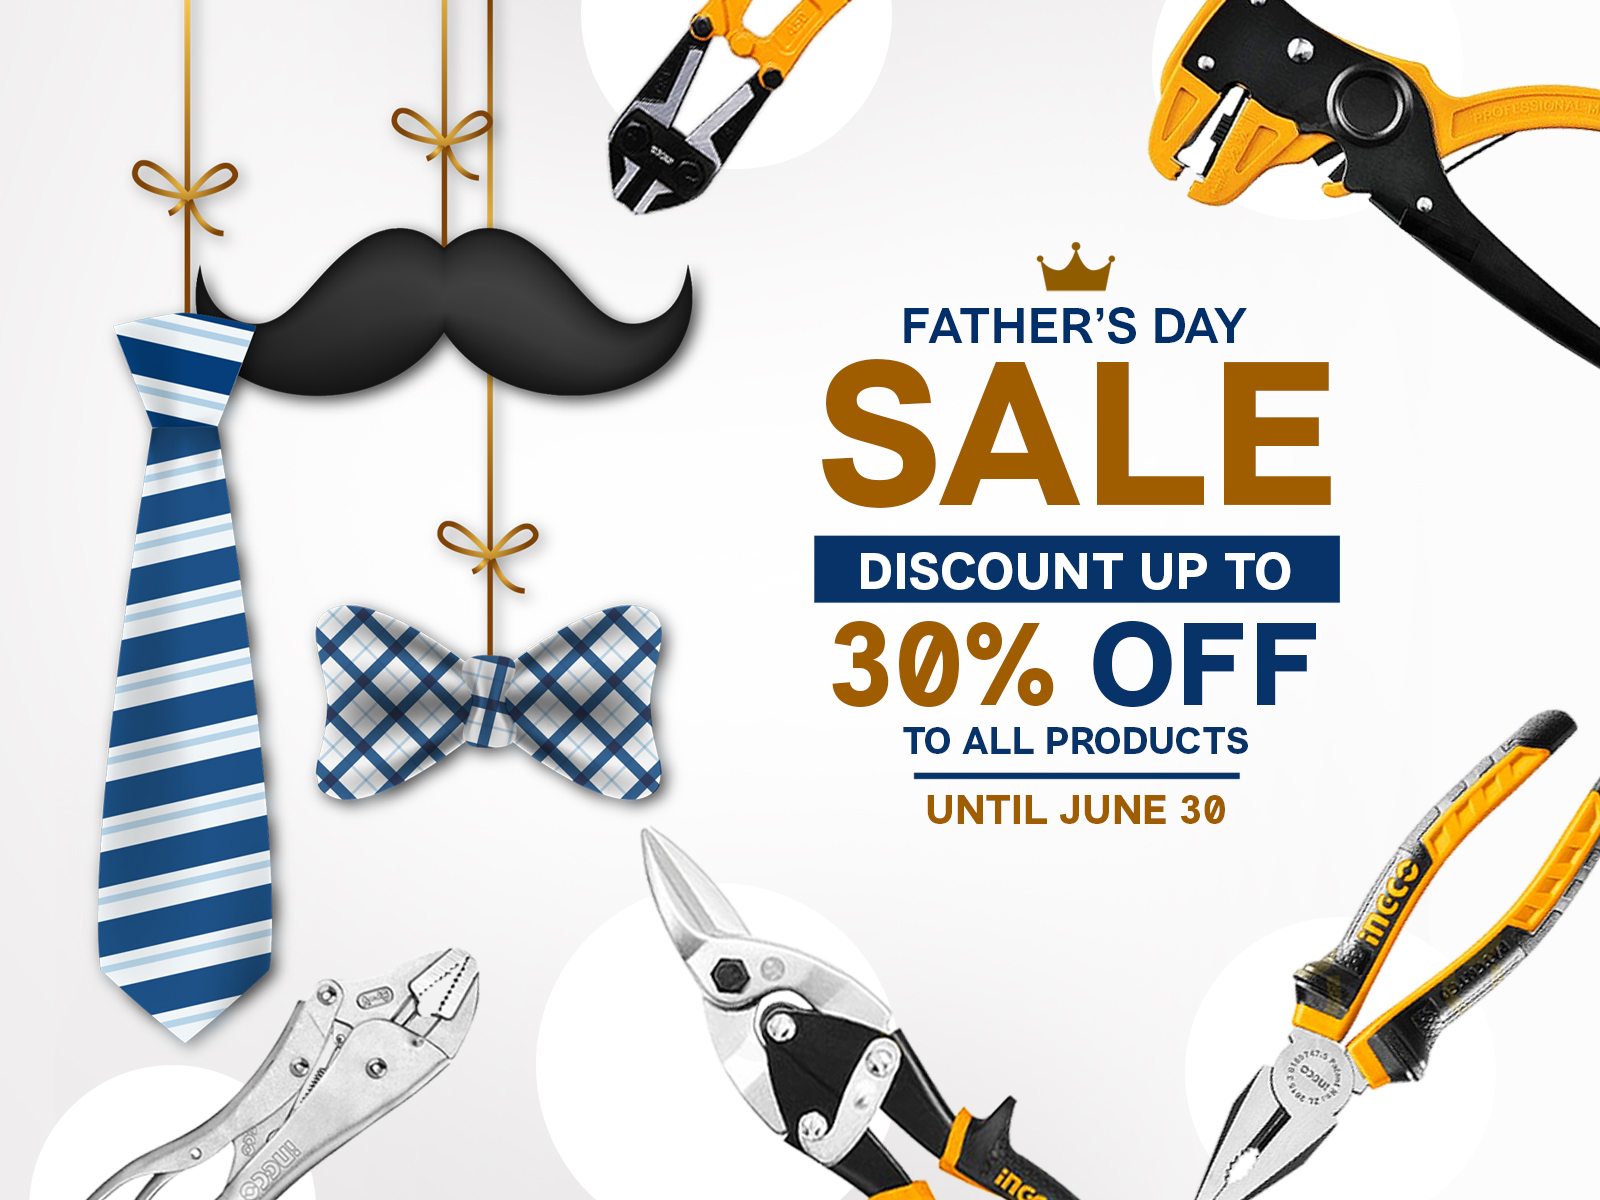 FATHERS DAY SALE by Pong Tapawan on Dribbble